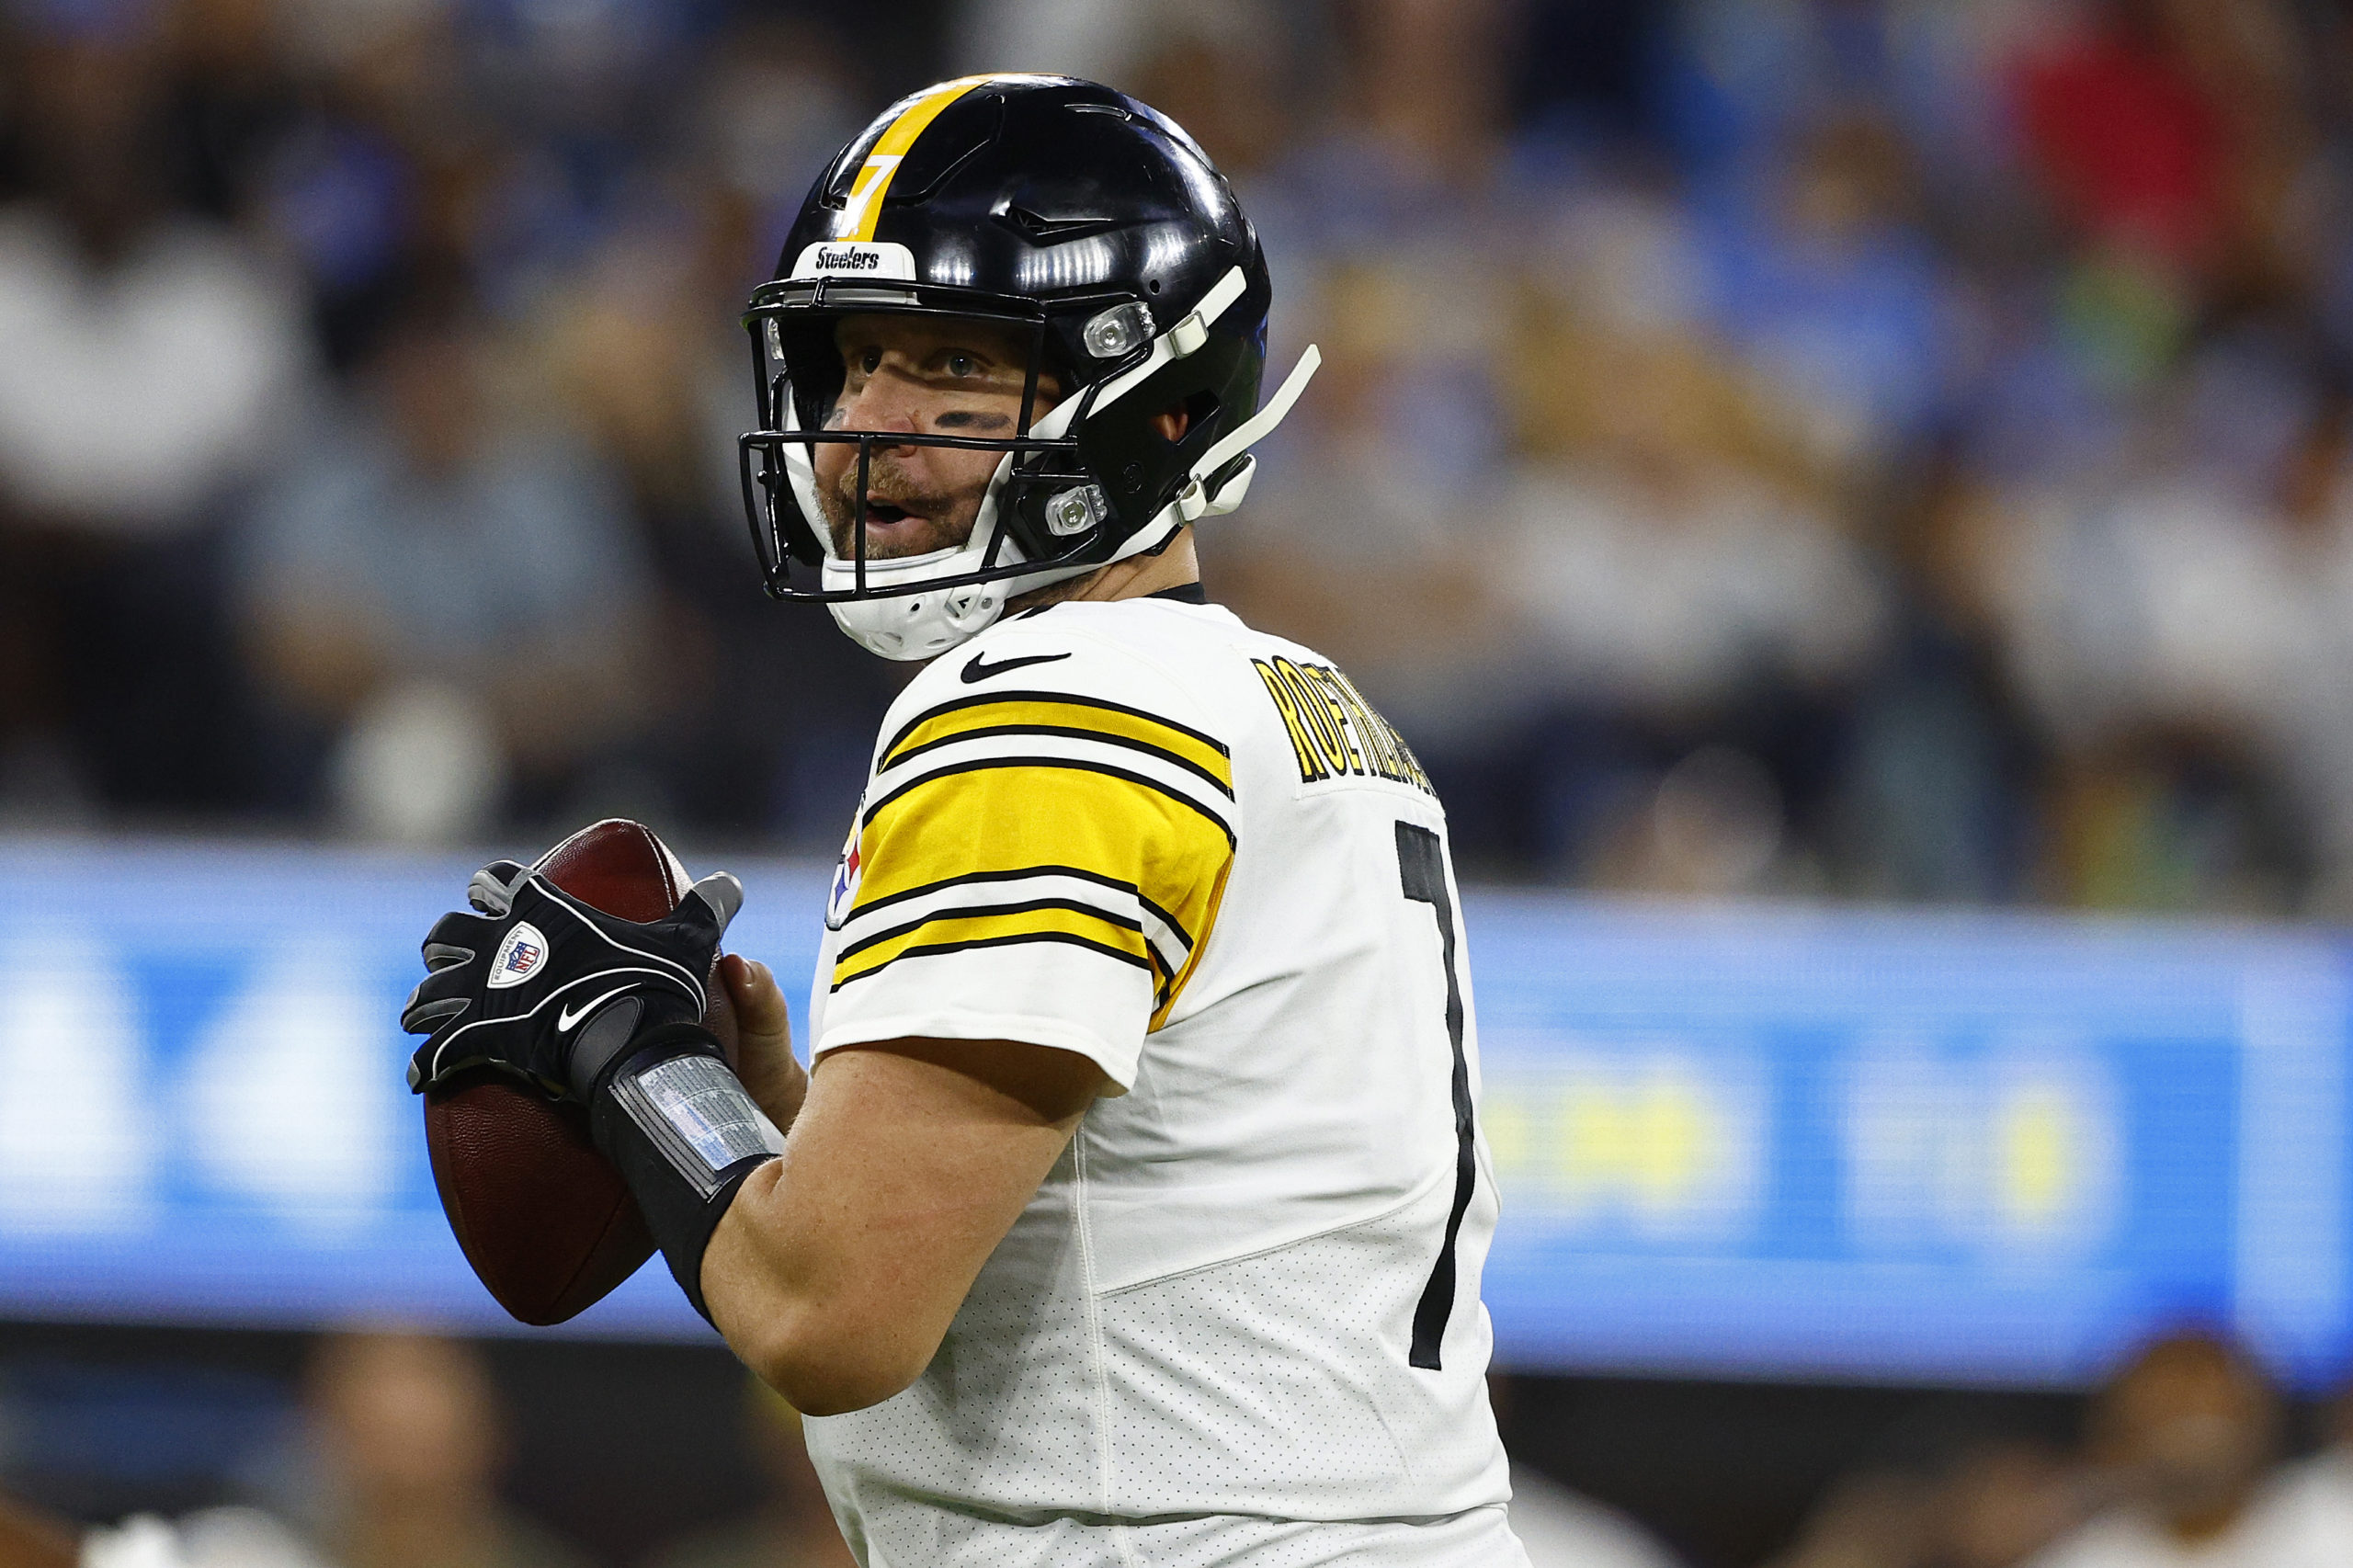 INGLEWOOD, CALIFORNIA - NOVEMBER 21: Ben Roethlisberger #7 of the Pittsburgh Steelers looks to pass against the Los Angeles Chargers during the second half at SoFi Stadium on November 21, 2021 in Inglewood, California. (Photo by Ronald Martinez/Getty Images)